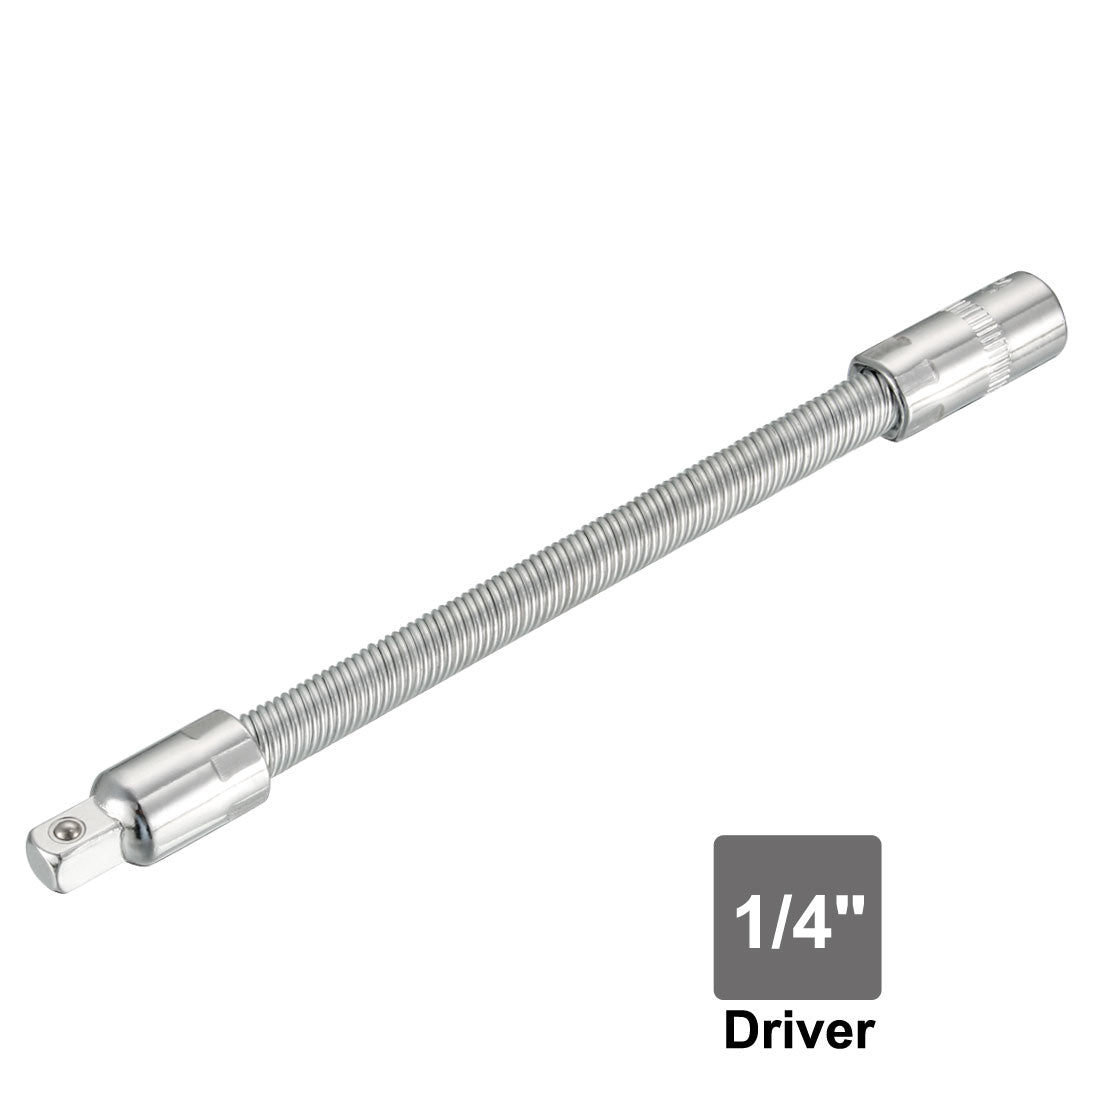 Uxcell Uxcell 1/4-inch Drive Flexible Extension Bar 200mm Length